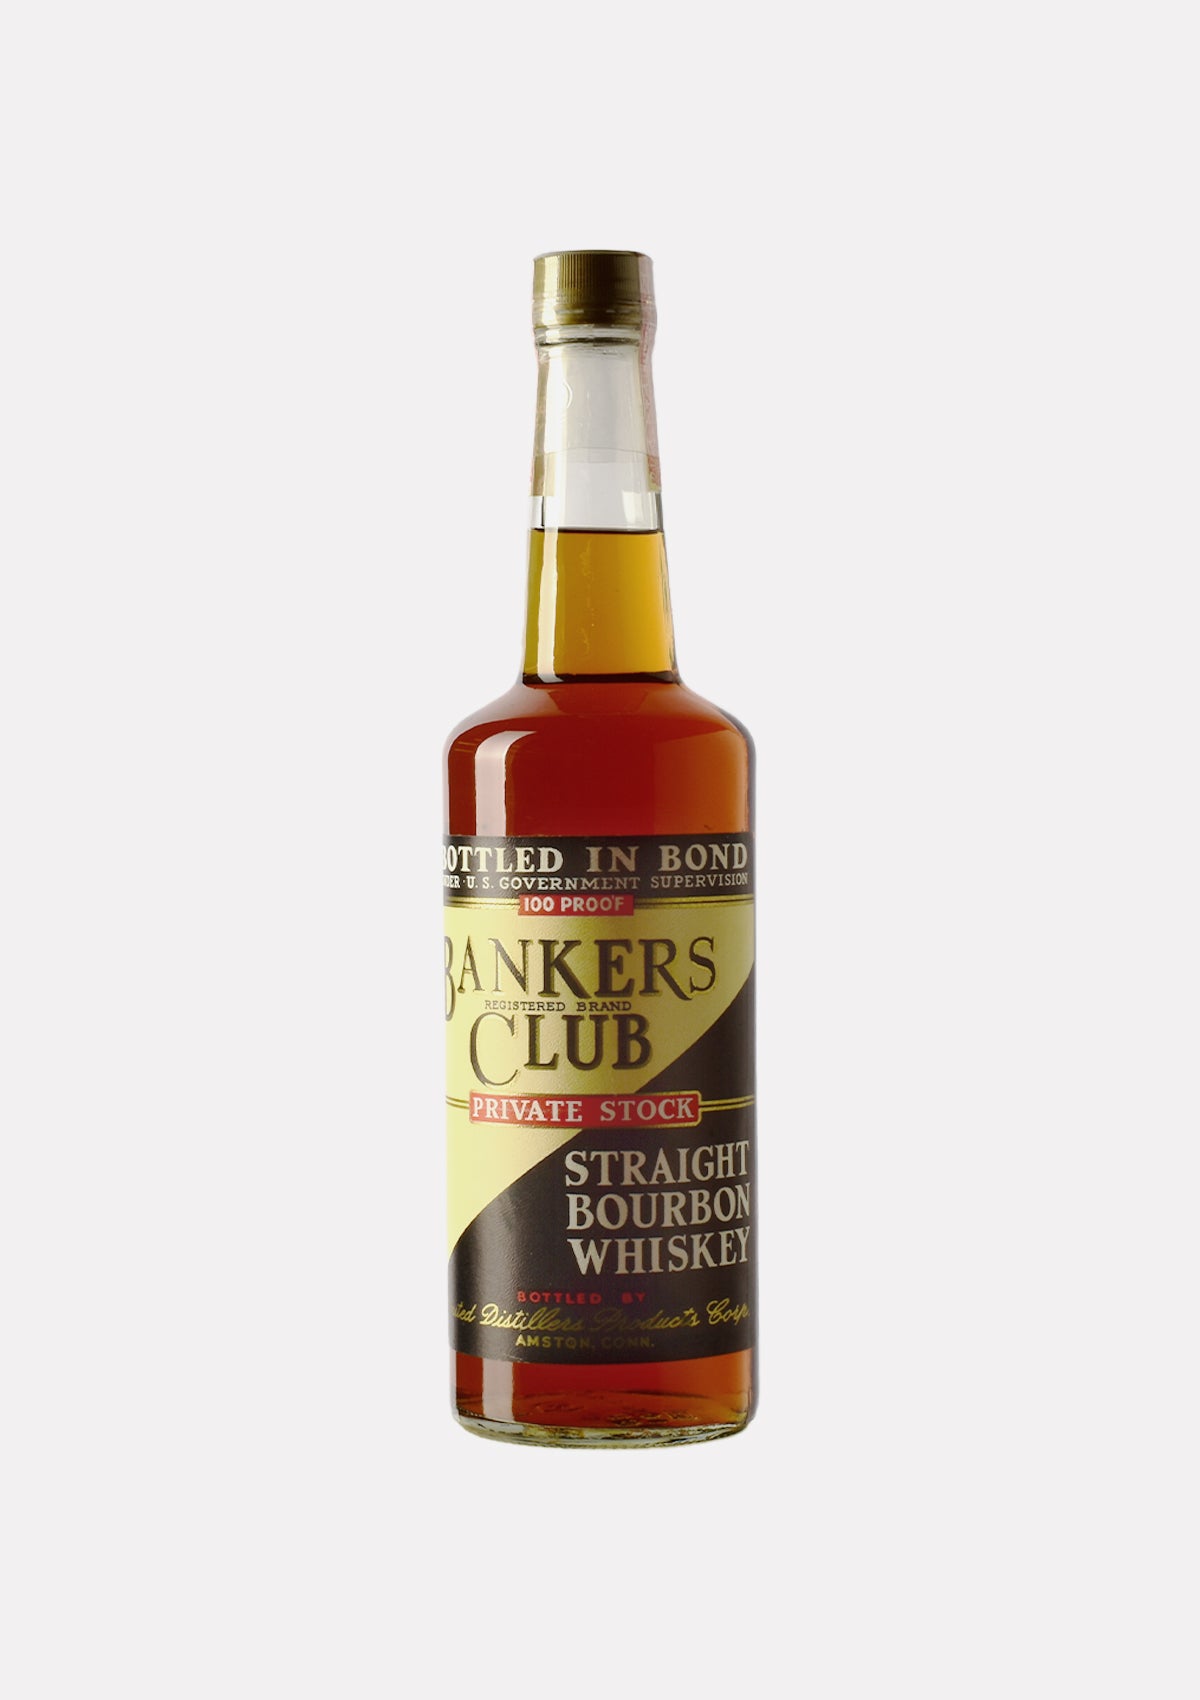 Bankers Club Private Stock Straight Bourbon Whiskey